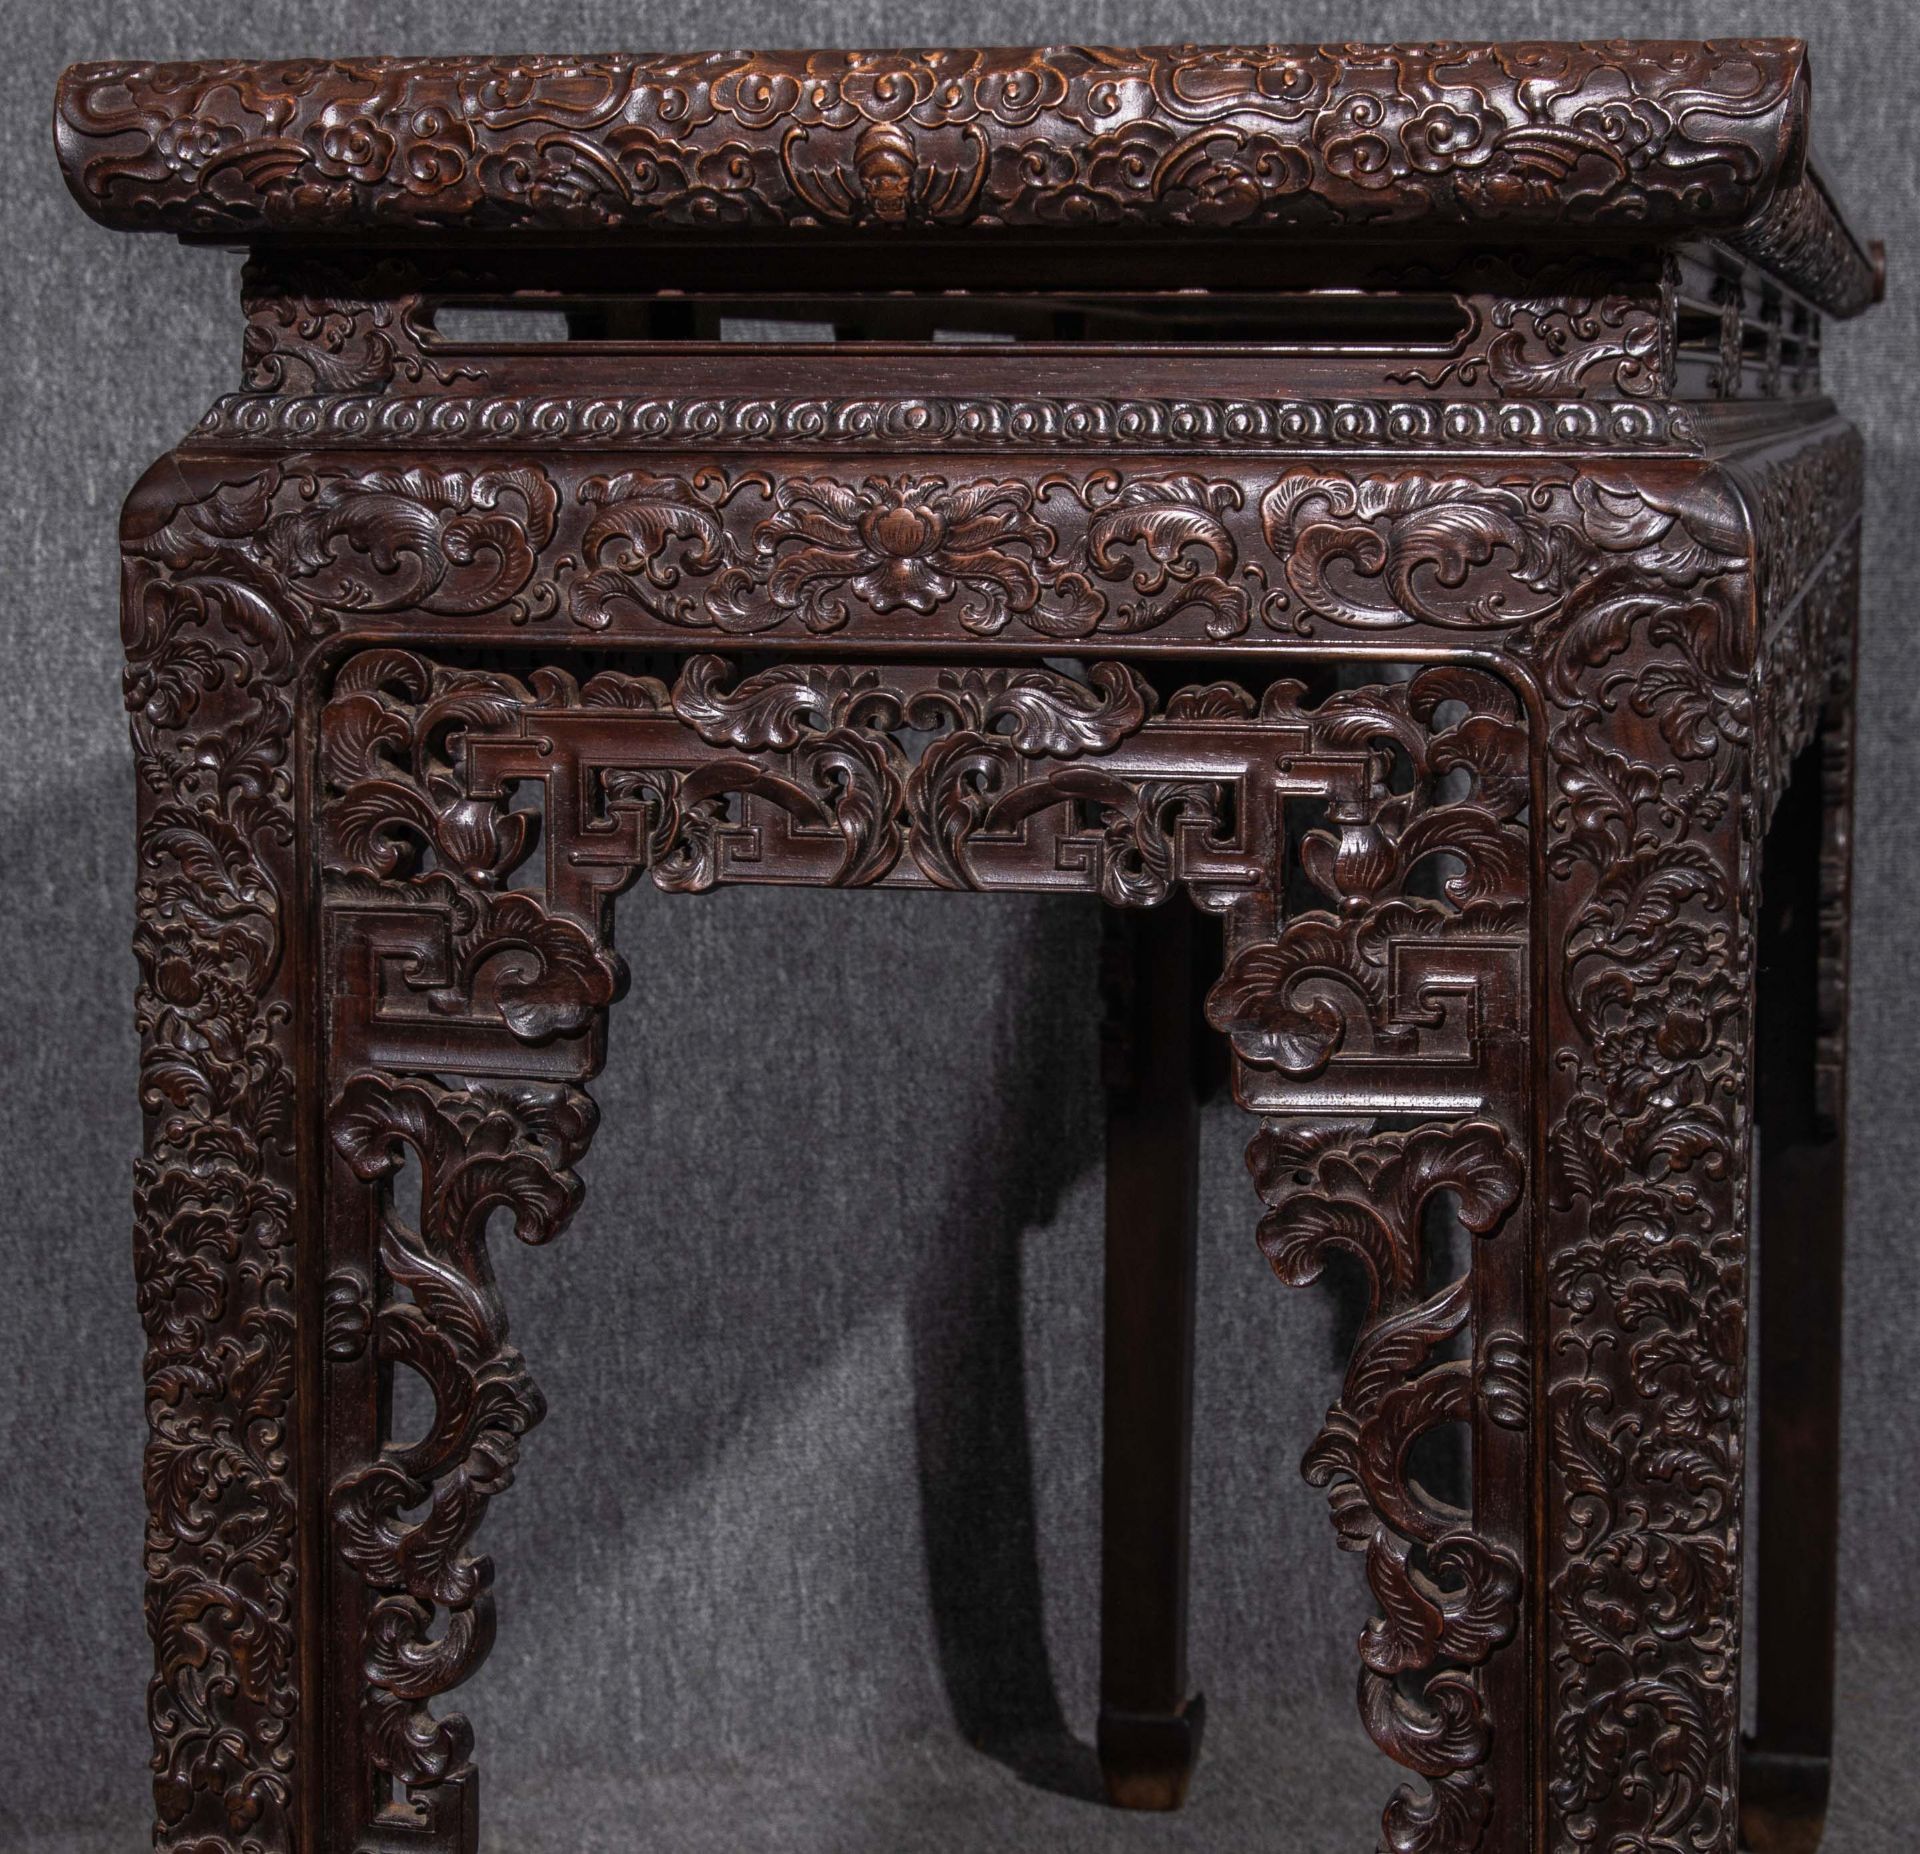 Chinese Qing Dynasty rosewood desk - Image 7 of 10